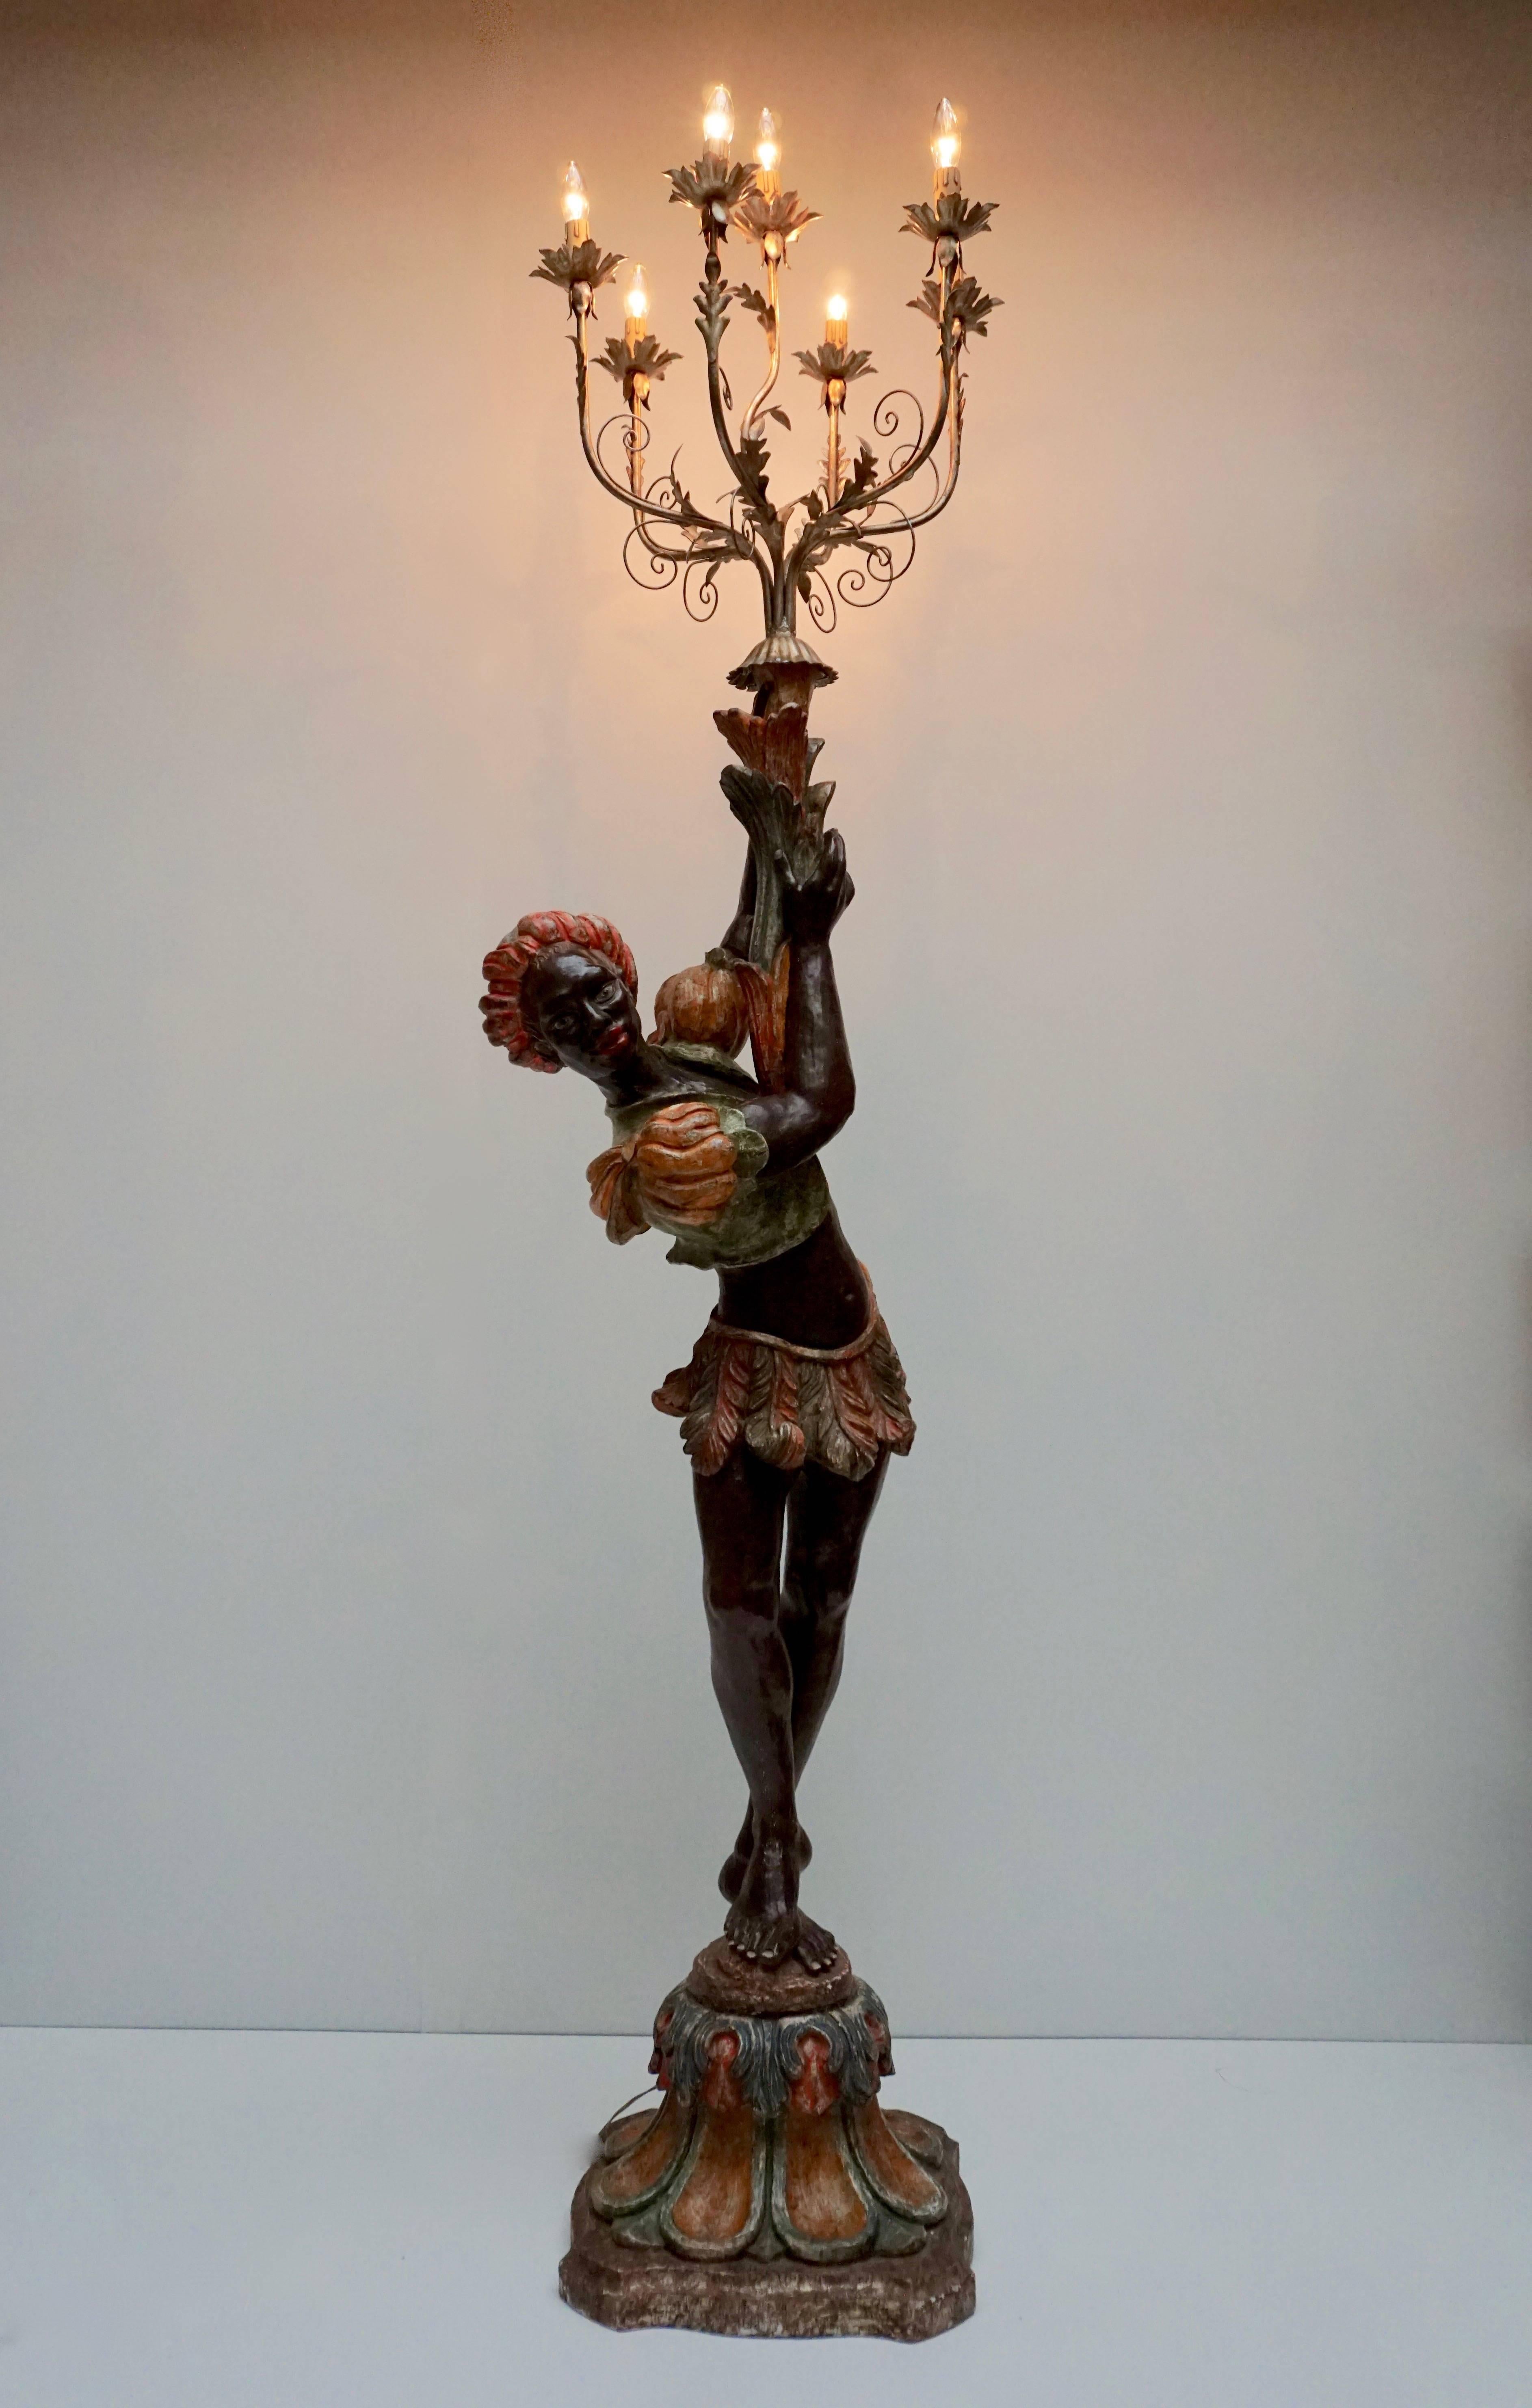 This is an exquisite decorative Venetian style candelabra floor lamp.
The figure are on decorative wooden stand and holds a large candelabra above its head with seven candle light bulbs. 

Dimensions in cm: Height 212 cm x width 50 cm x depth